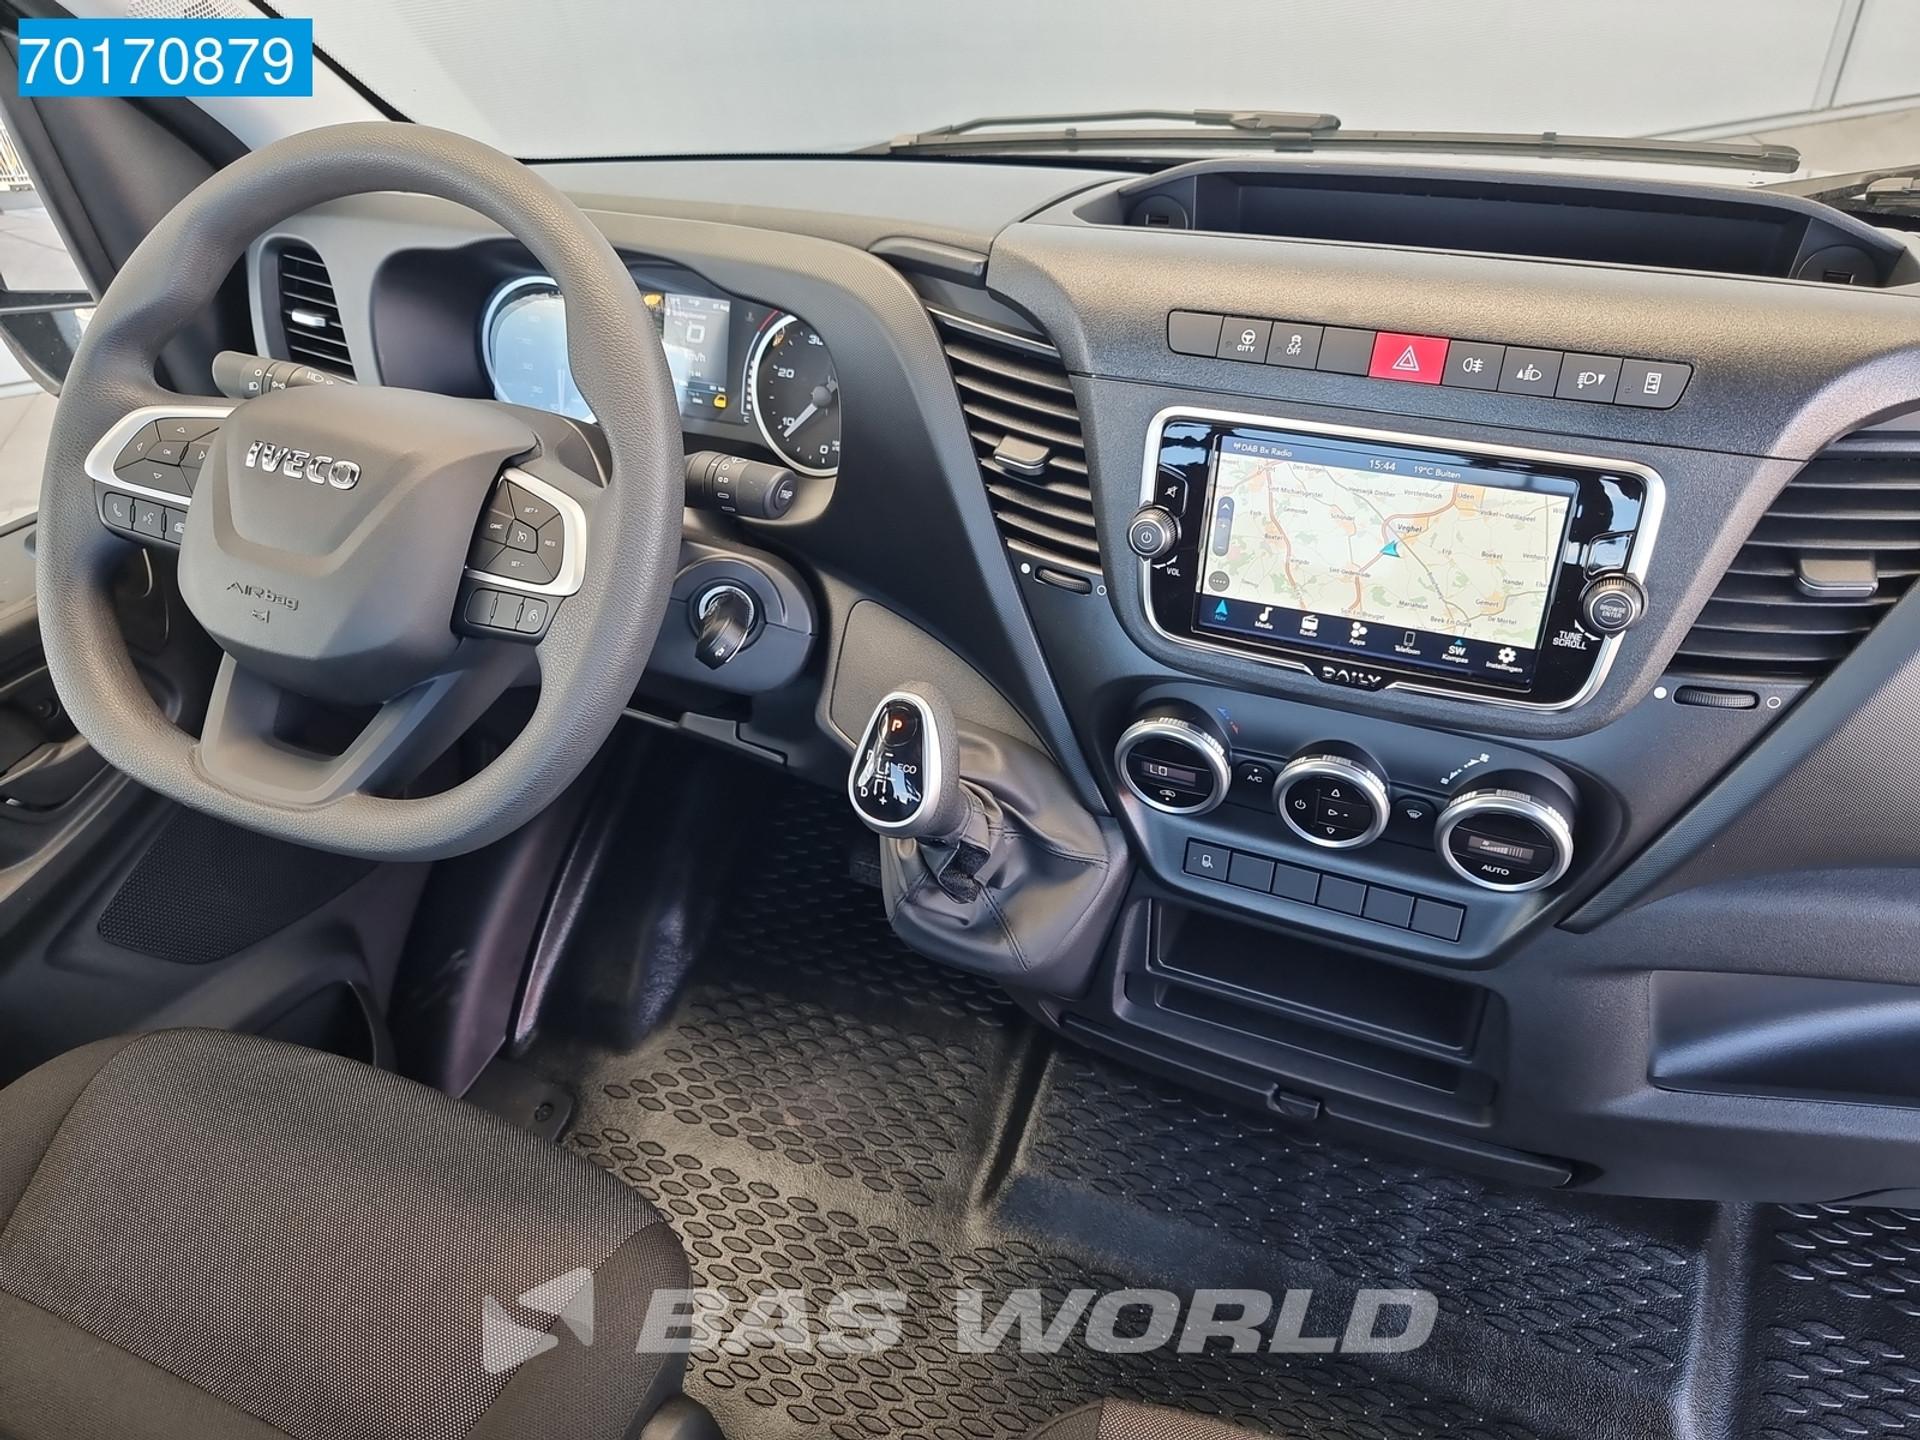 Foto 8 van Iveco Daily 35C18 3.0L Automaat Navi 4100mm wielbasis Hi Connect Chassis Cabien Pritsche Fahrgestell Airco Cruise control